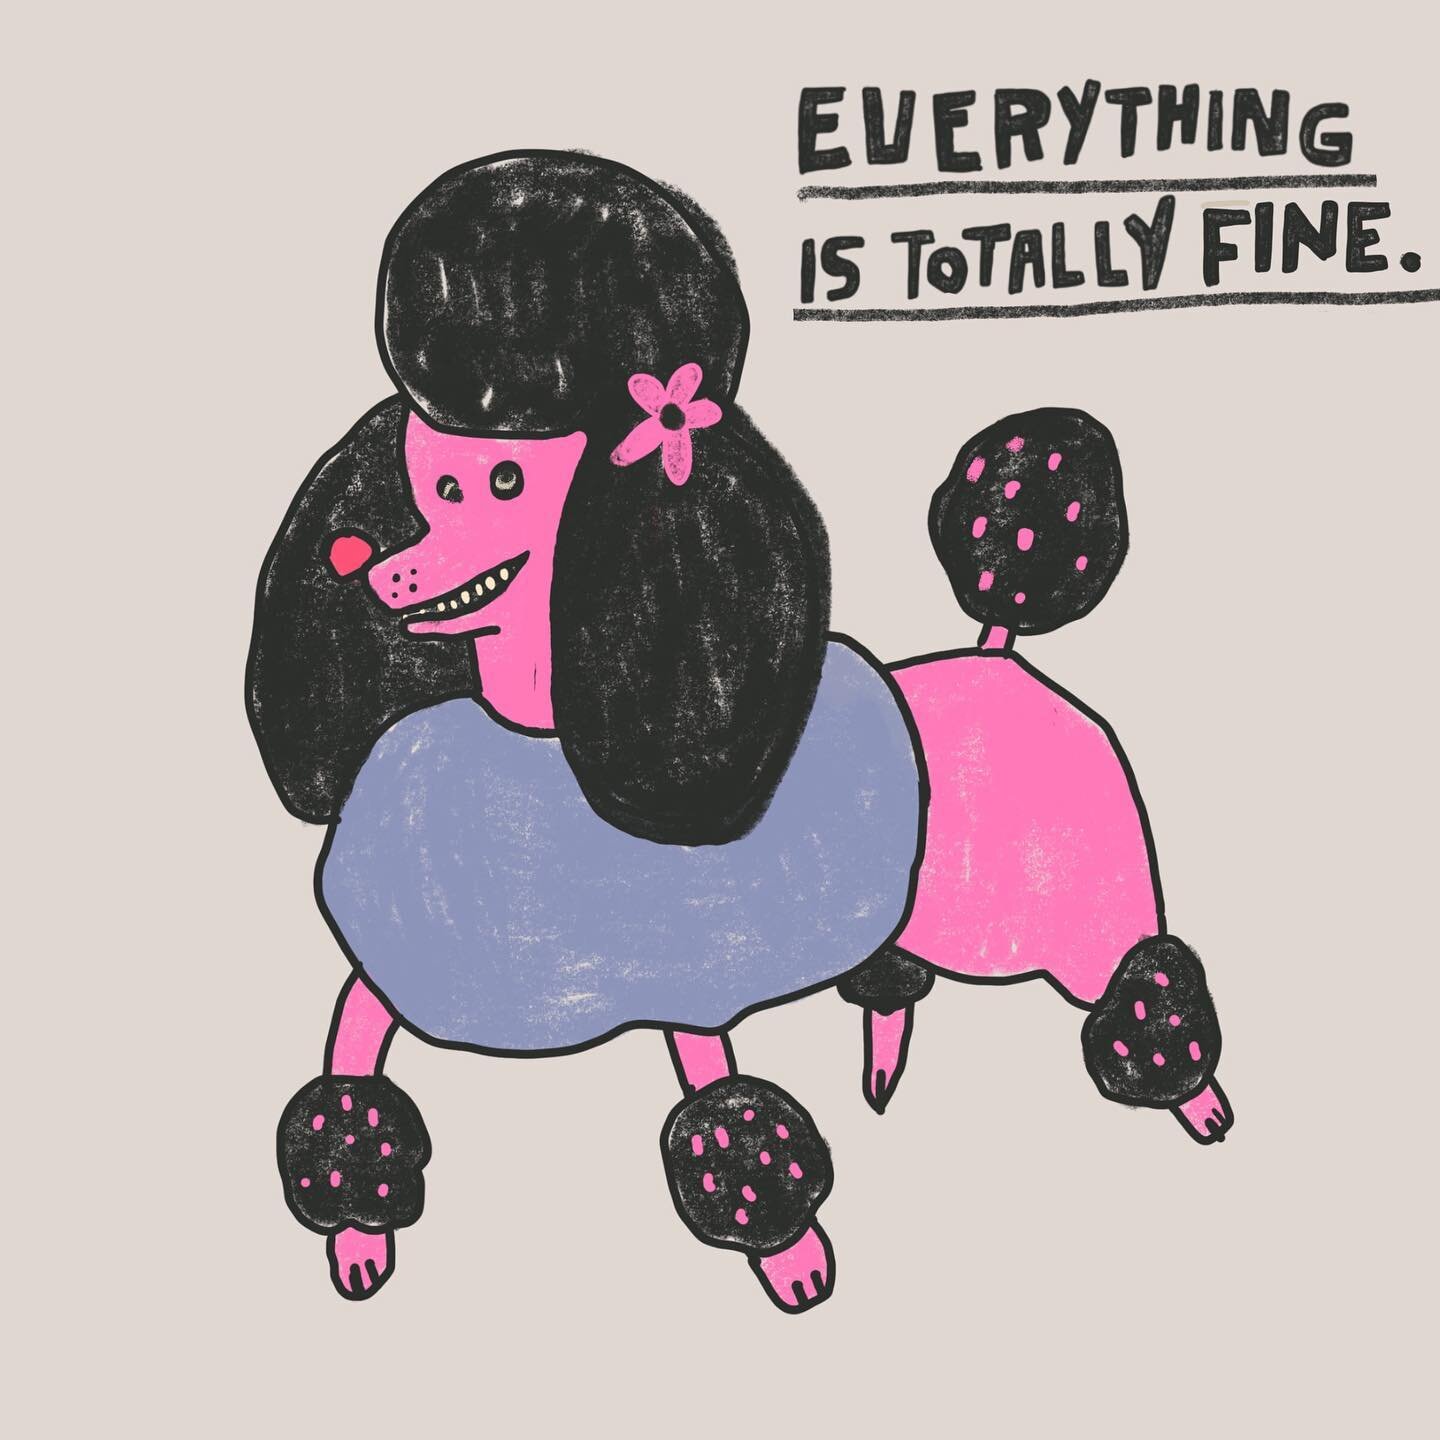 Waiting for those final results like 🧐. Really excited for some positive change. 
.
.
.
#poodle #illustration_daily #illo #doodle #ladieswhopaint #womenwhodraw #illustrators #everythingisfine #color #print #art